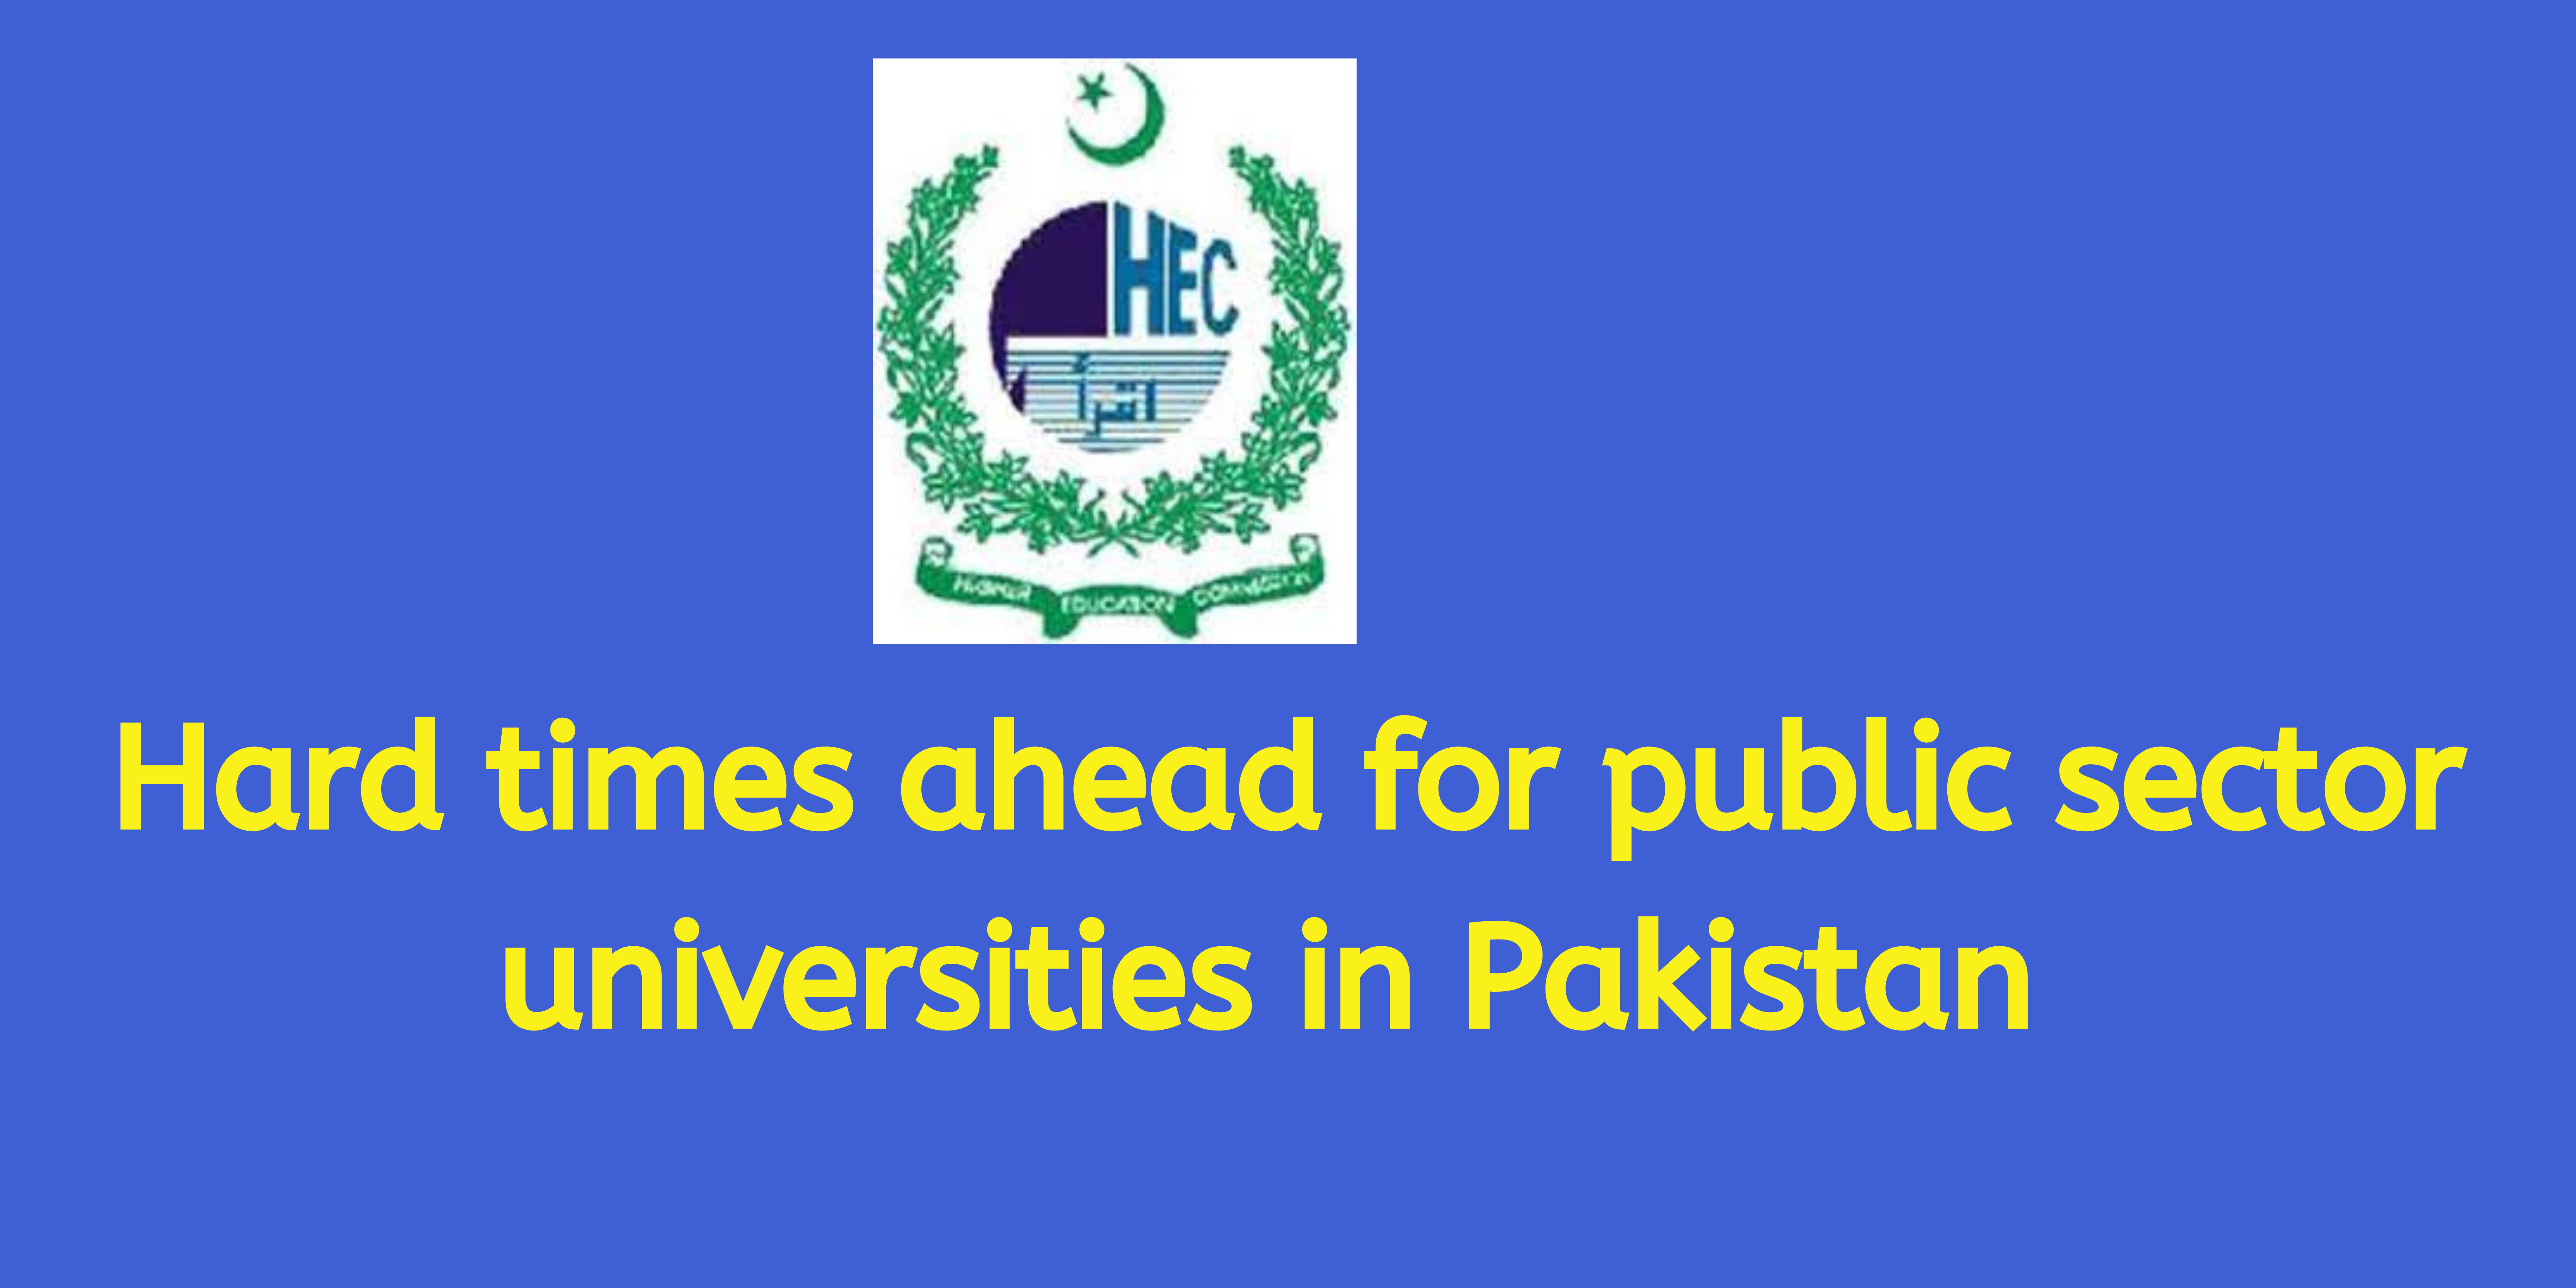 Hard times ahead for public sector universities in Pakistan